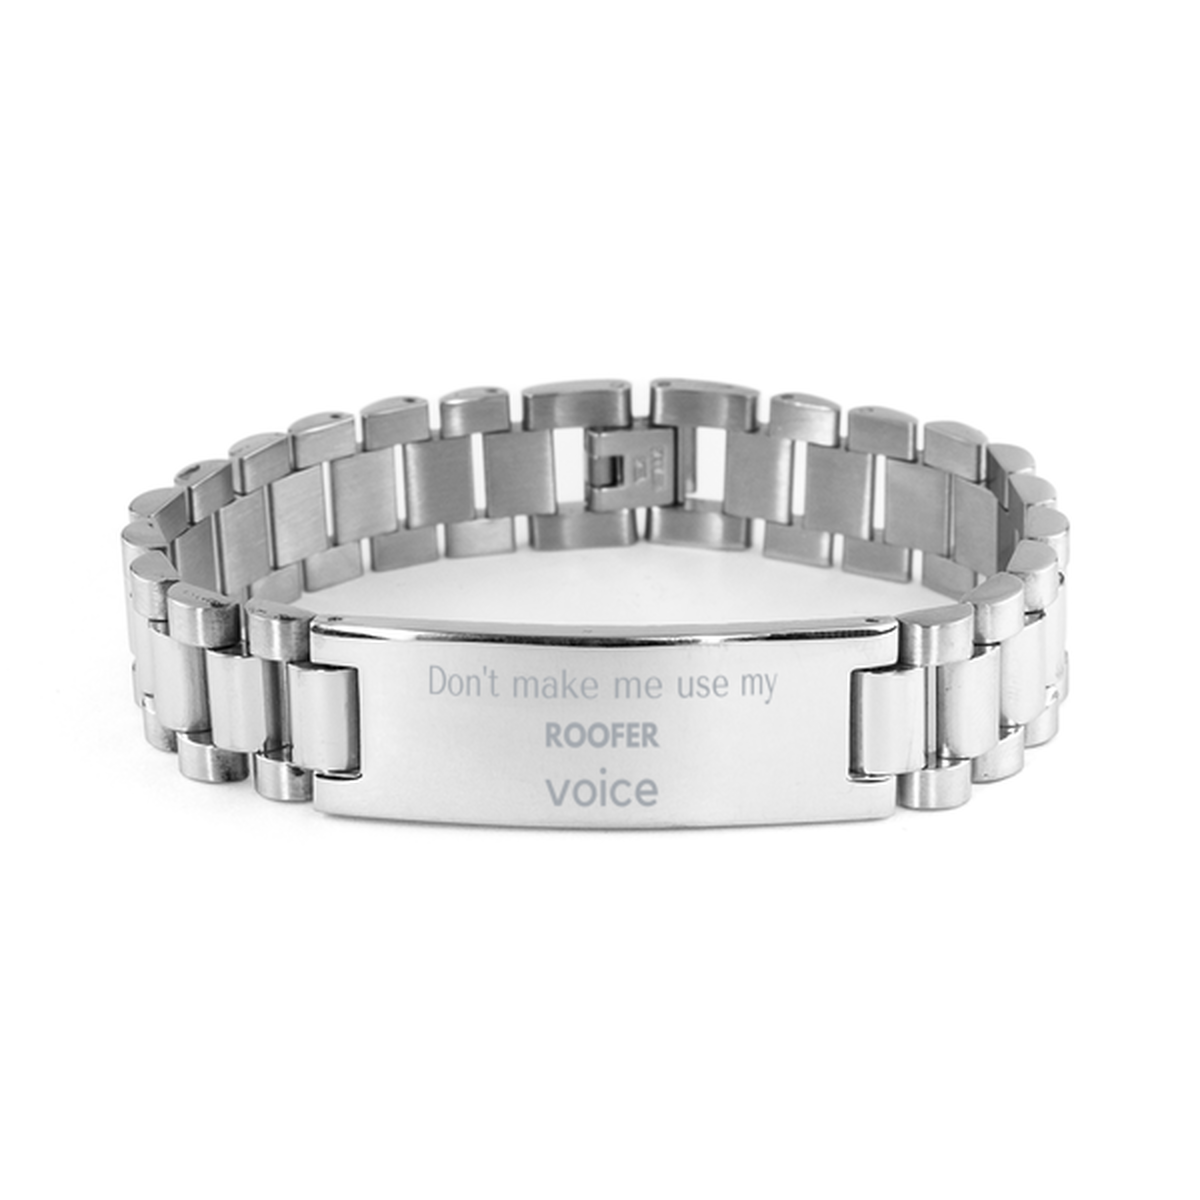 Don't make me use my Roofer voice, Sarcasm Roofer Gifts, Christmas Roofer Ladder Stainless Steel Bracelet Birthday Unique Gifts For Roofer Coworkers, Men, Women, Colleague, Friends